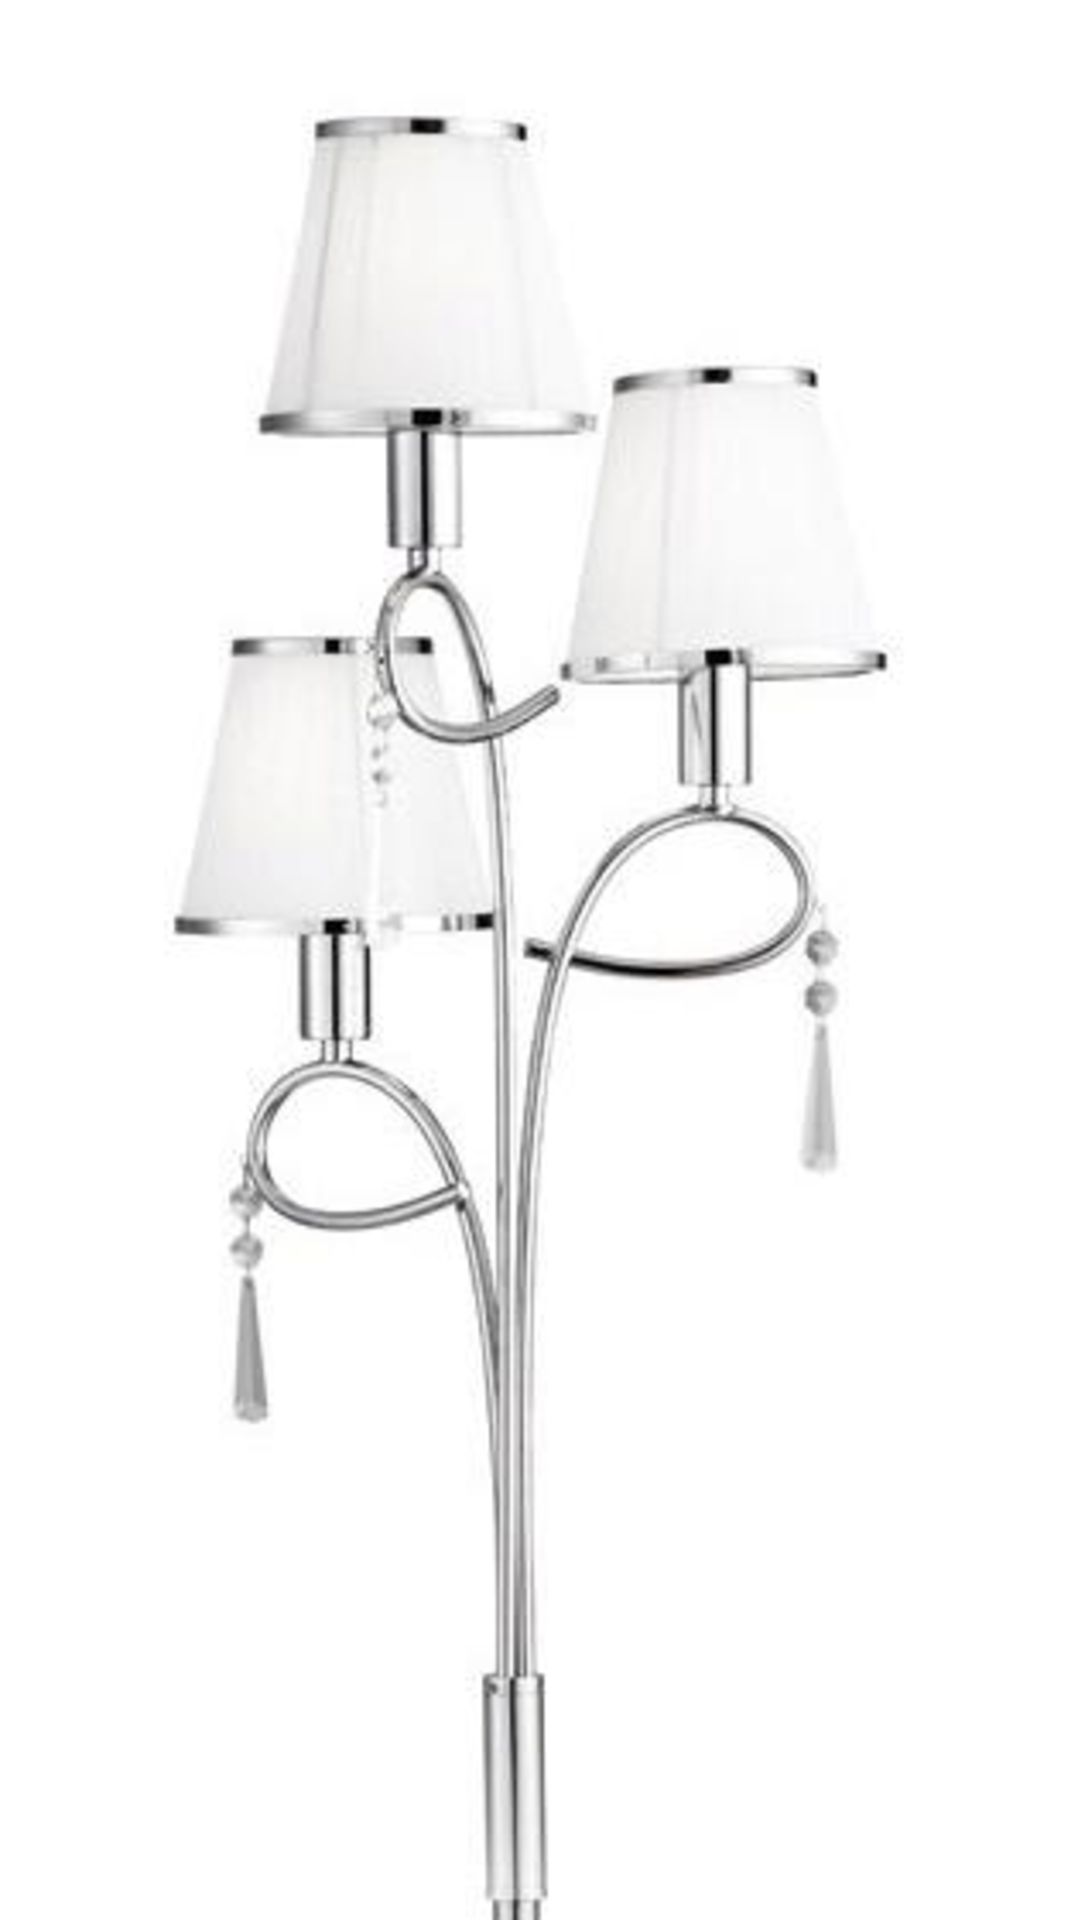 1 x Simplicity Polished Chrome 3 Light Floor Lamp With White String Lamp Shades - 240v - Height 159c